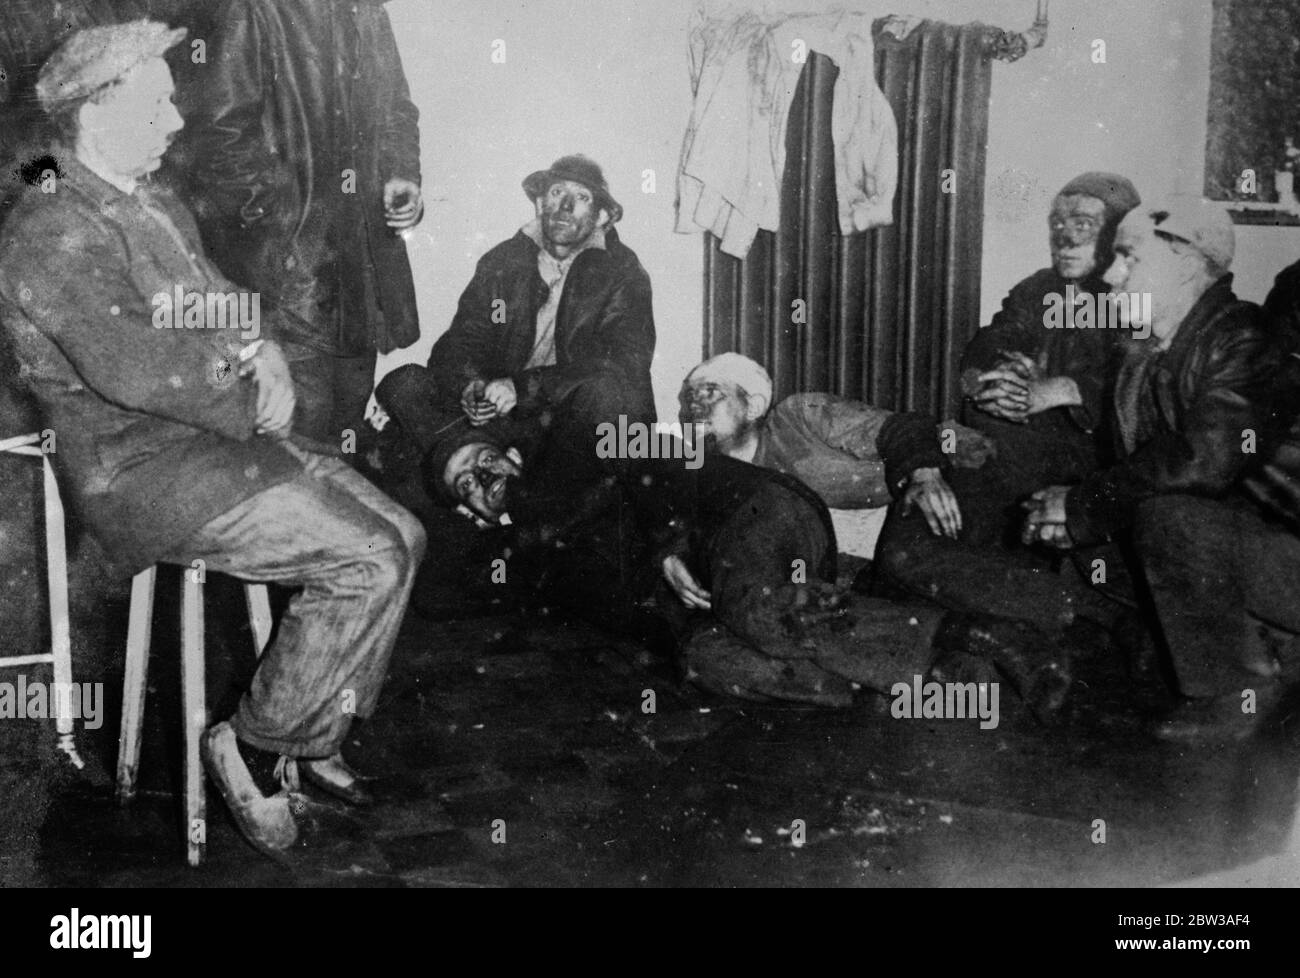 43 perish in Belgian mine disaster . Forty three men entomed when a disastrous explosion occured in a coal mine near Paturages , Belgium . The explosion occured in a gallery 2 , 700 feet underground . After the accident the mine was sealed . Photo shows survivors after the disaster . 17 May 1934 . Stock Photo